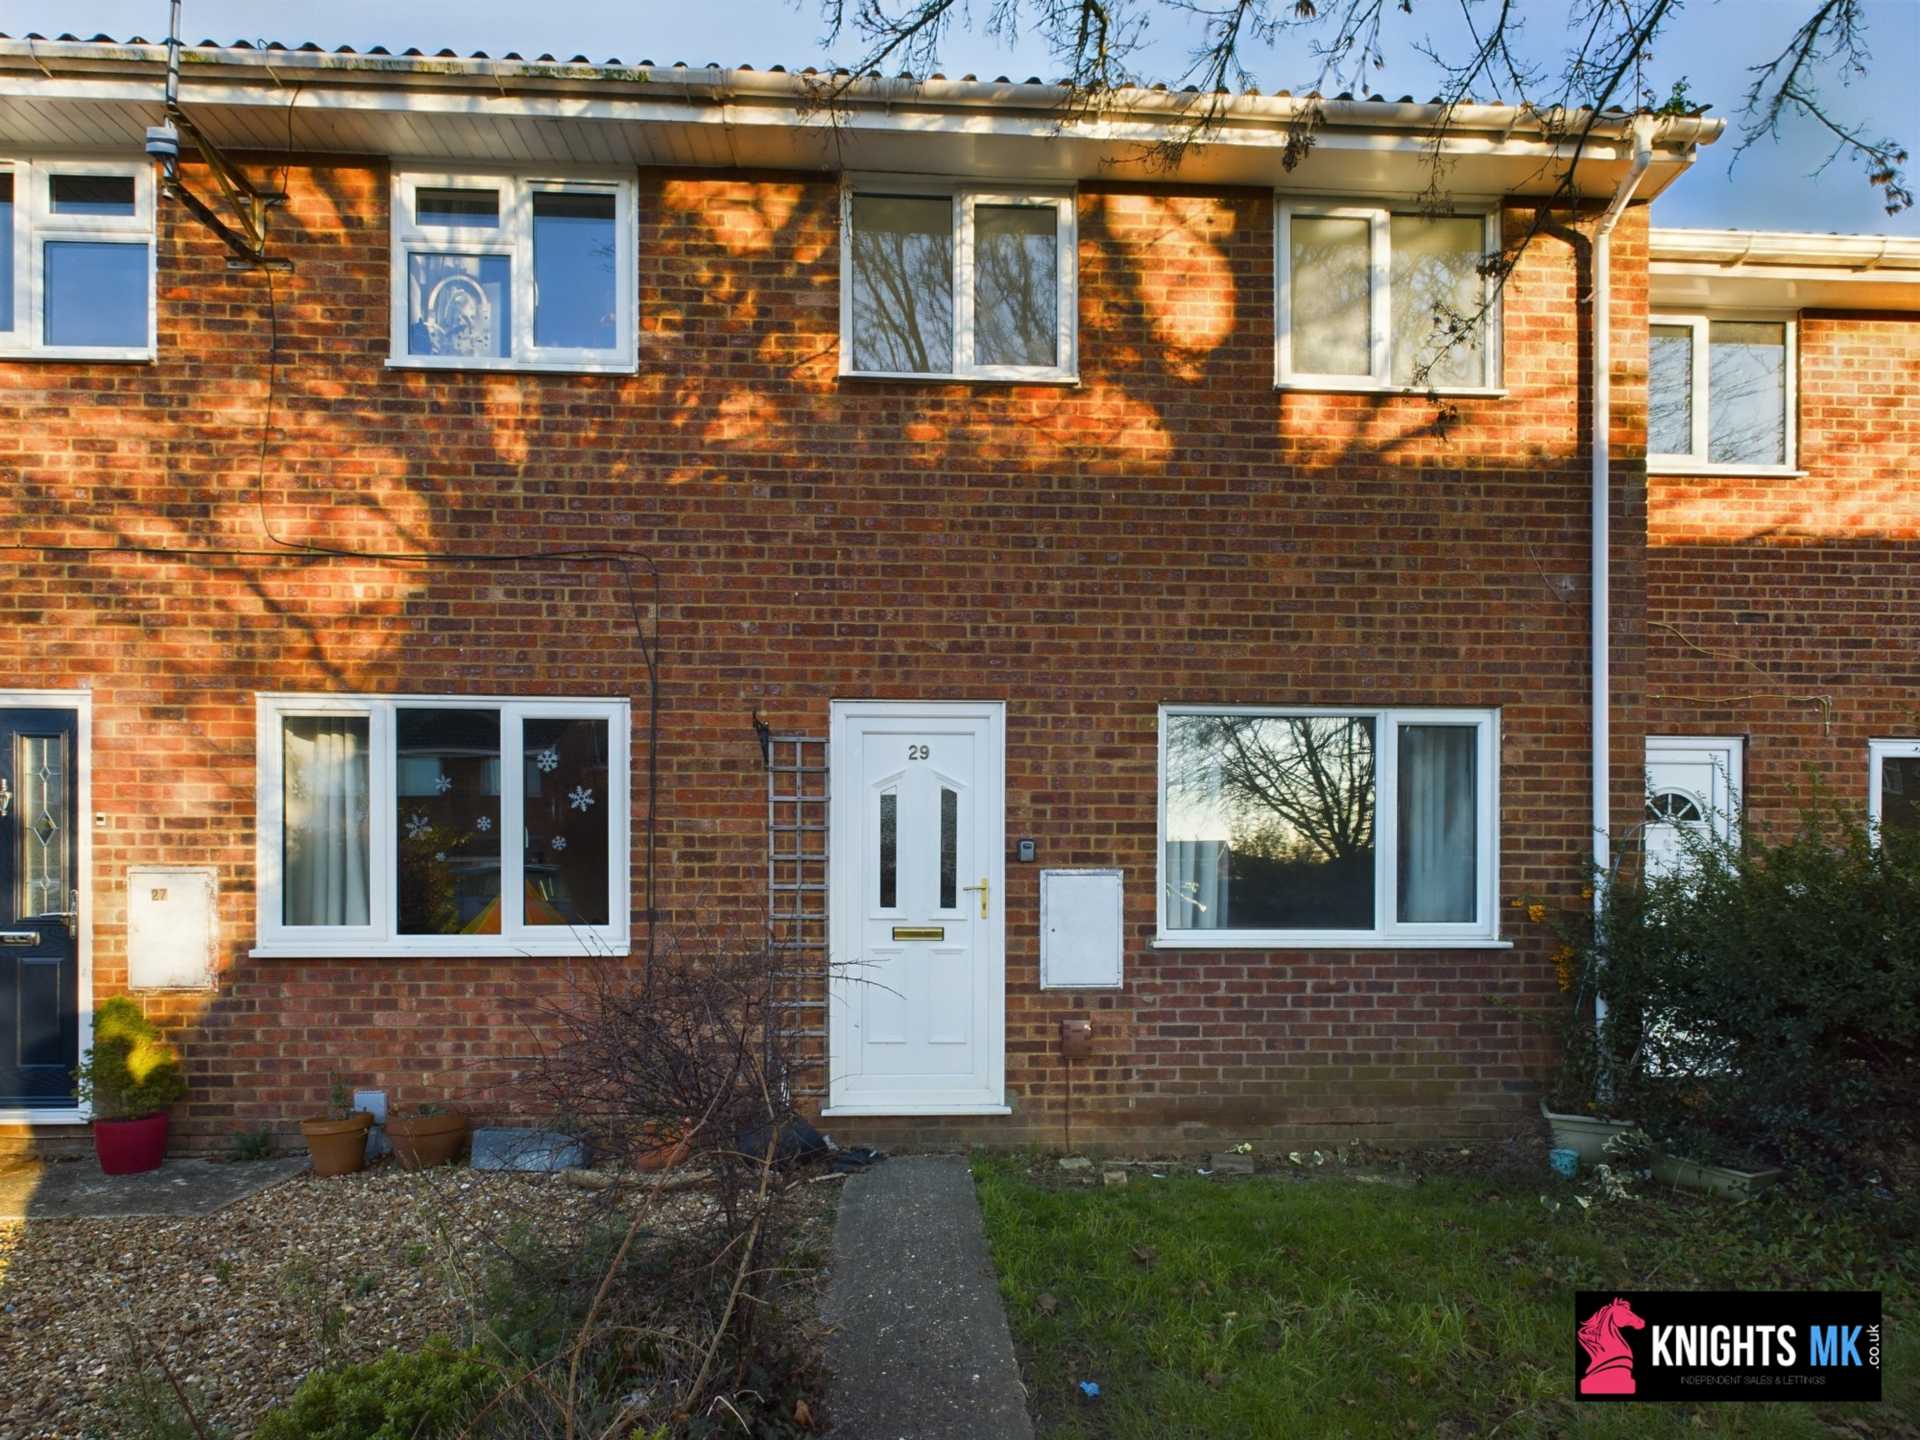 Carroll Close, Newport Pagnell, Image 2